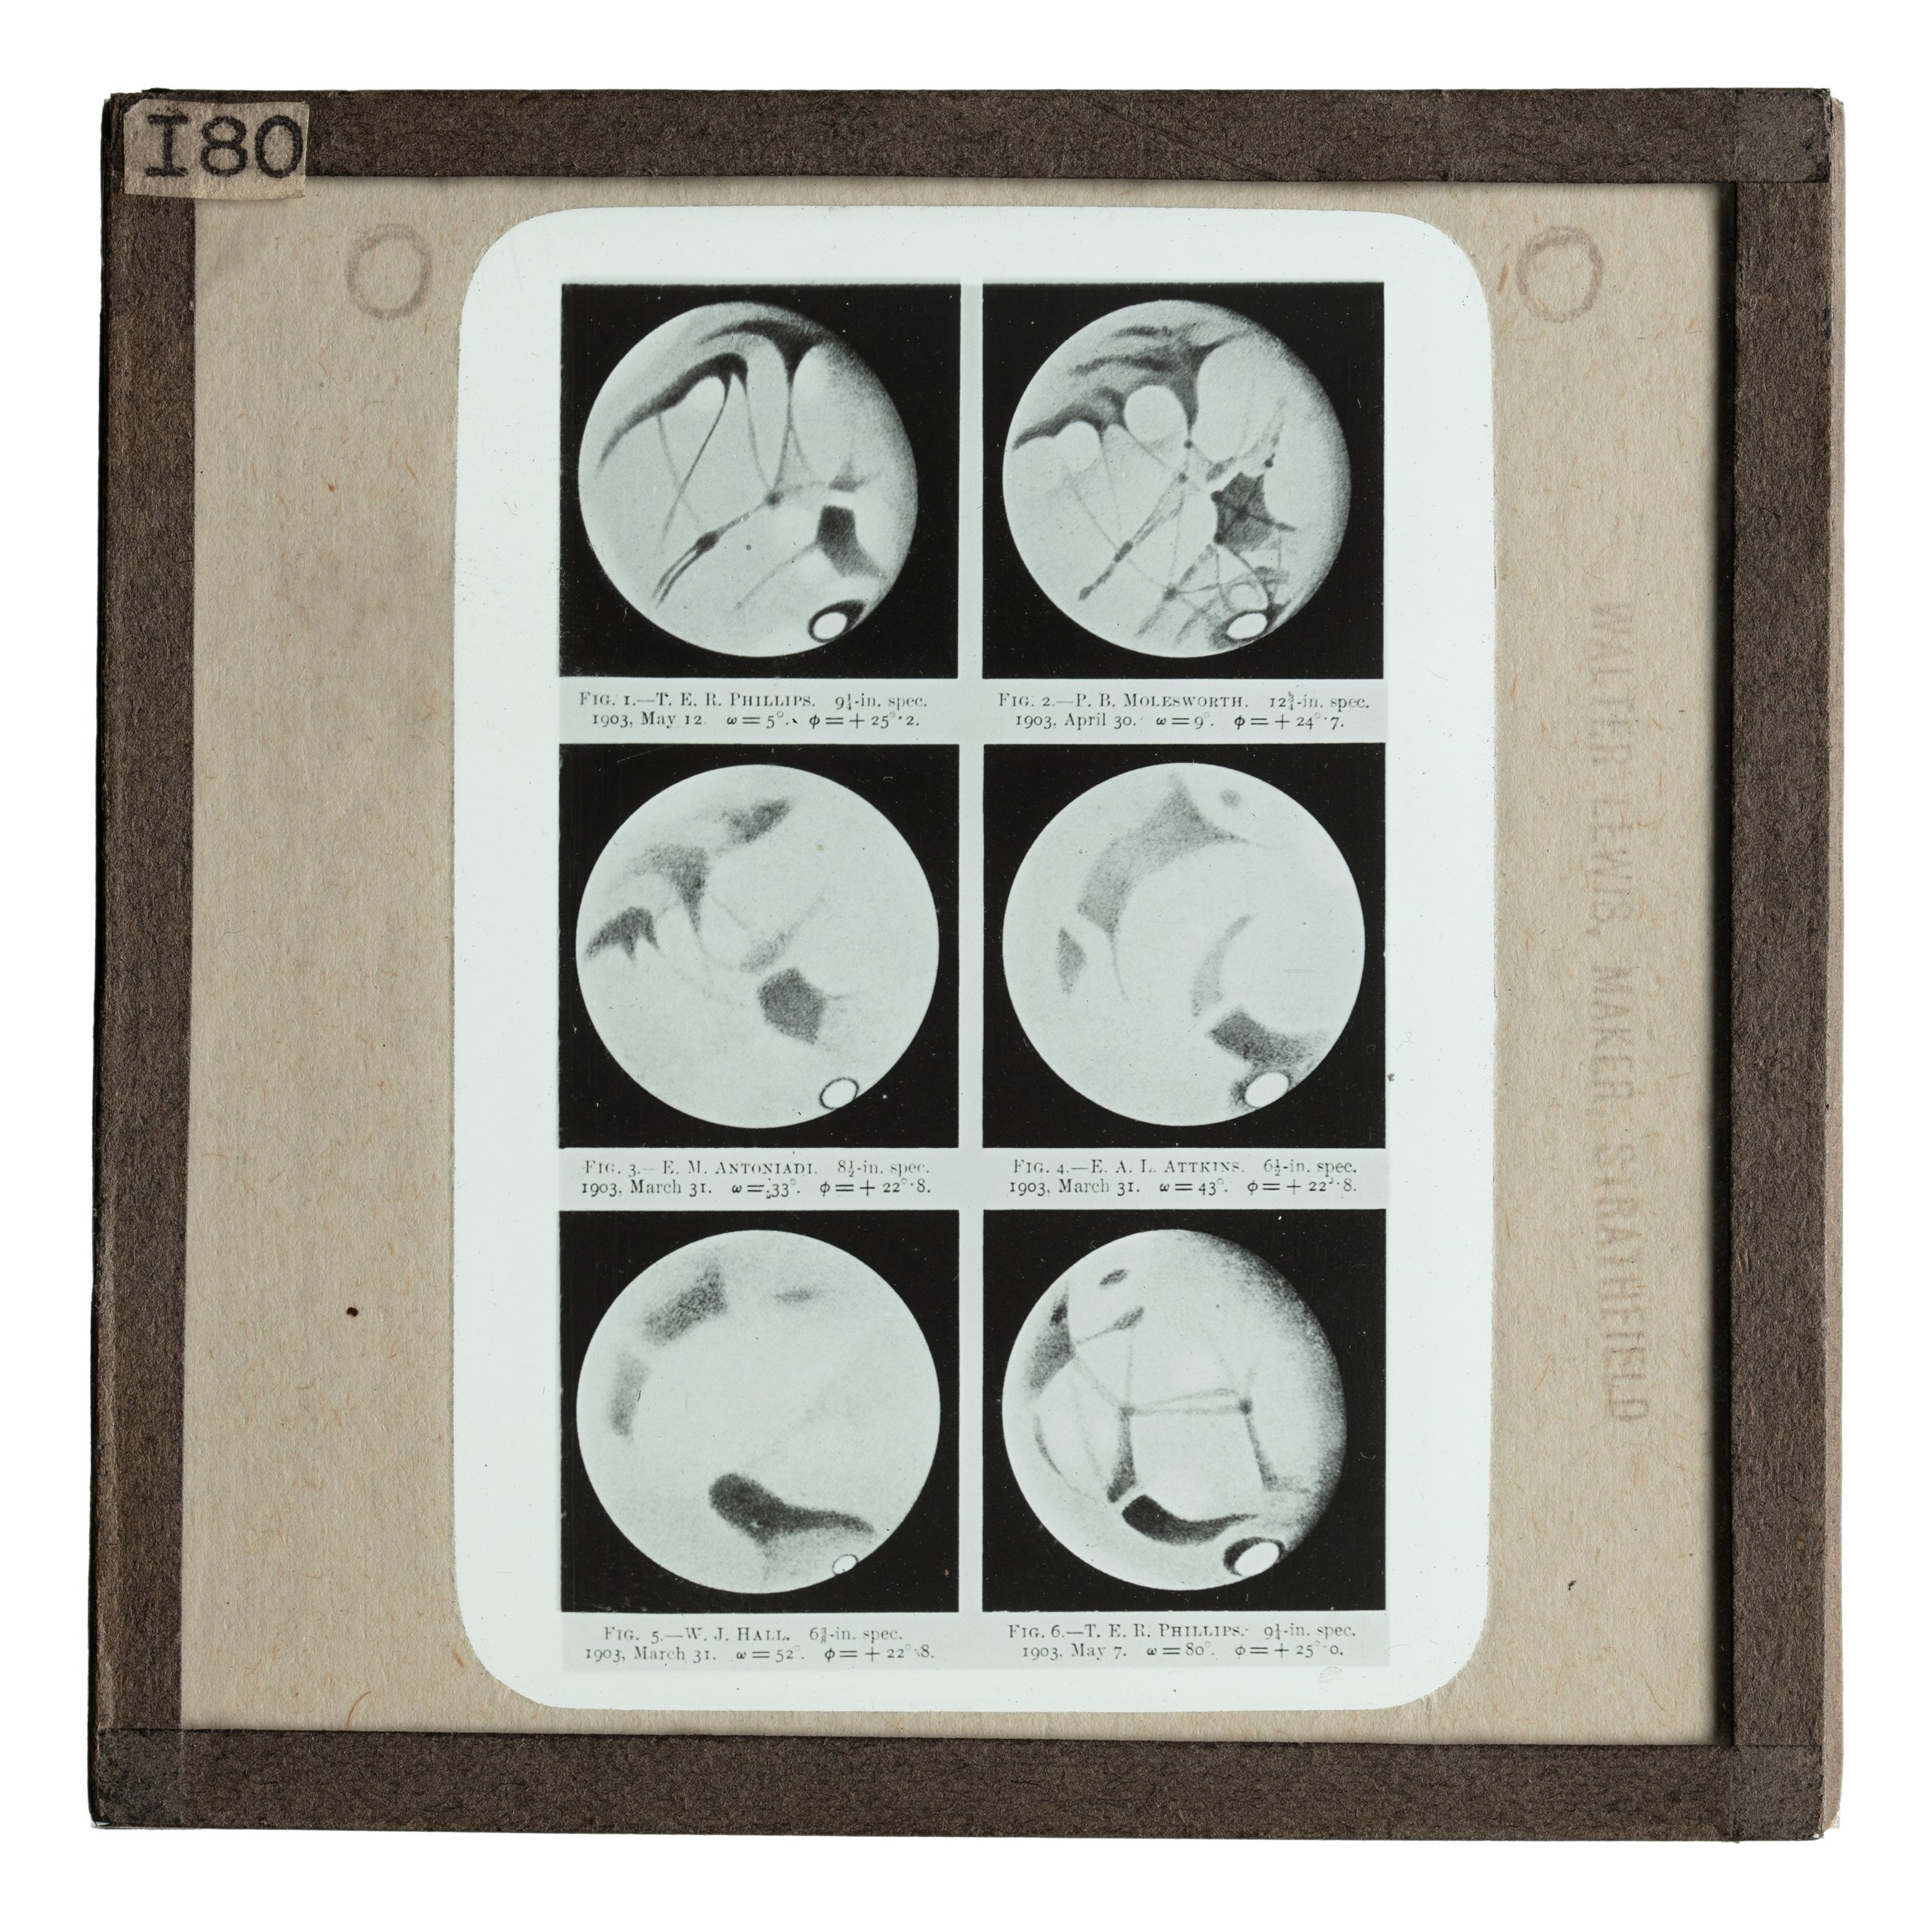 Lantern slide used at the Sydney Observatory for teaching astronomy